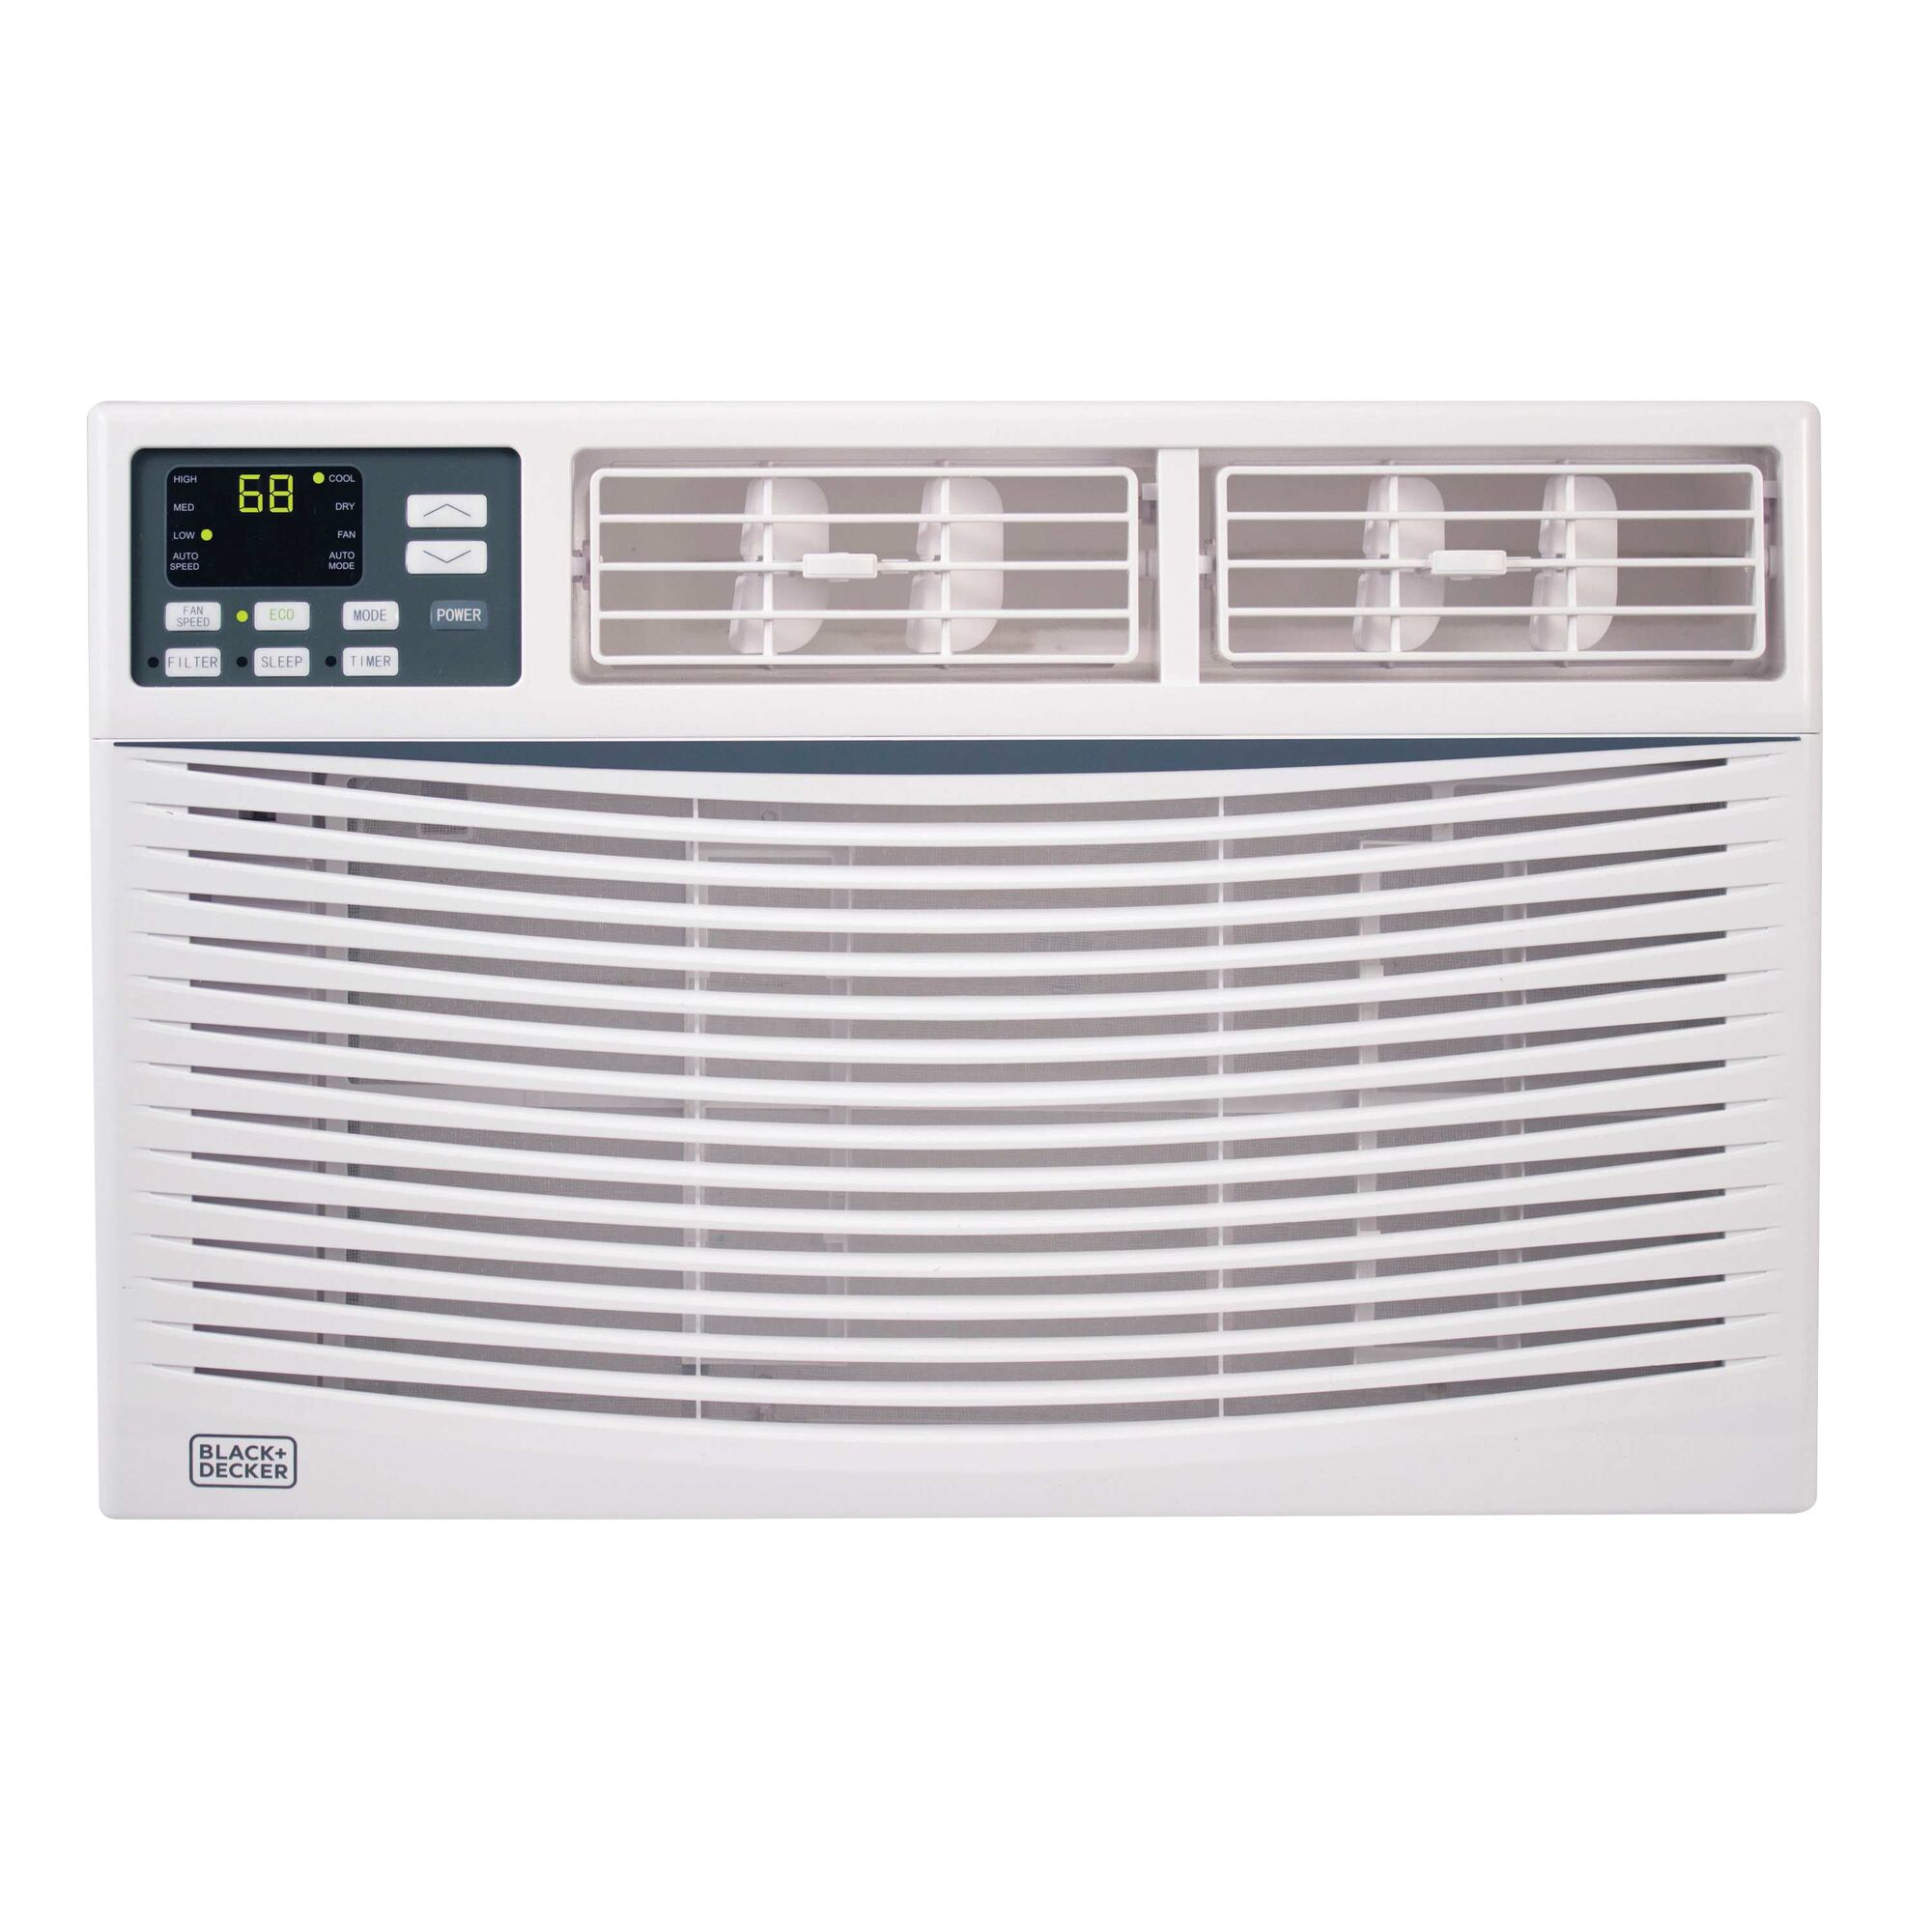 6000 B T U energy star electronic air conditioner with remote.